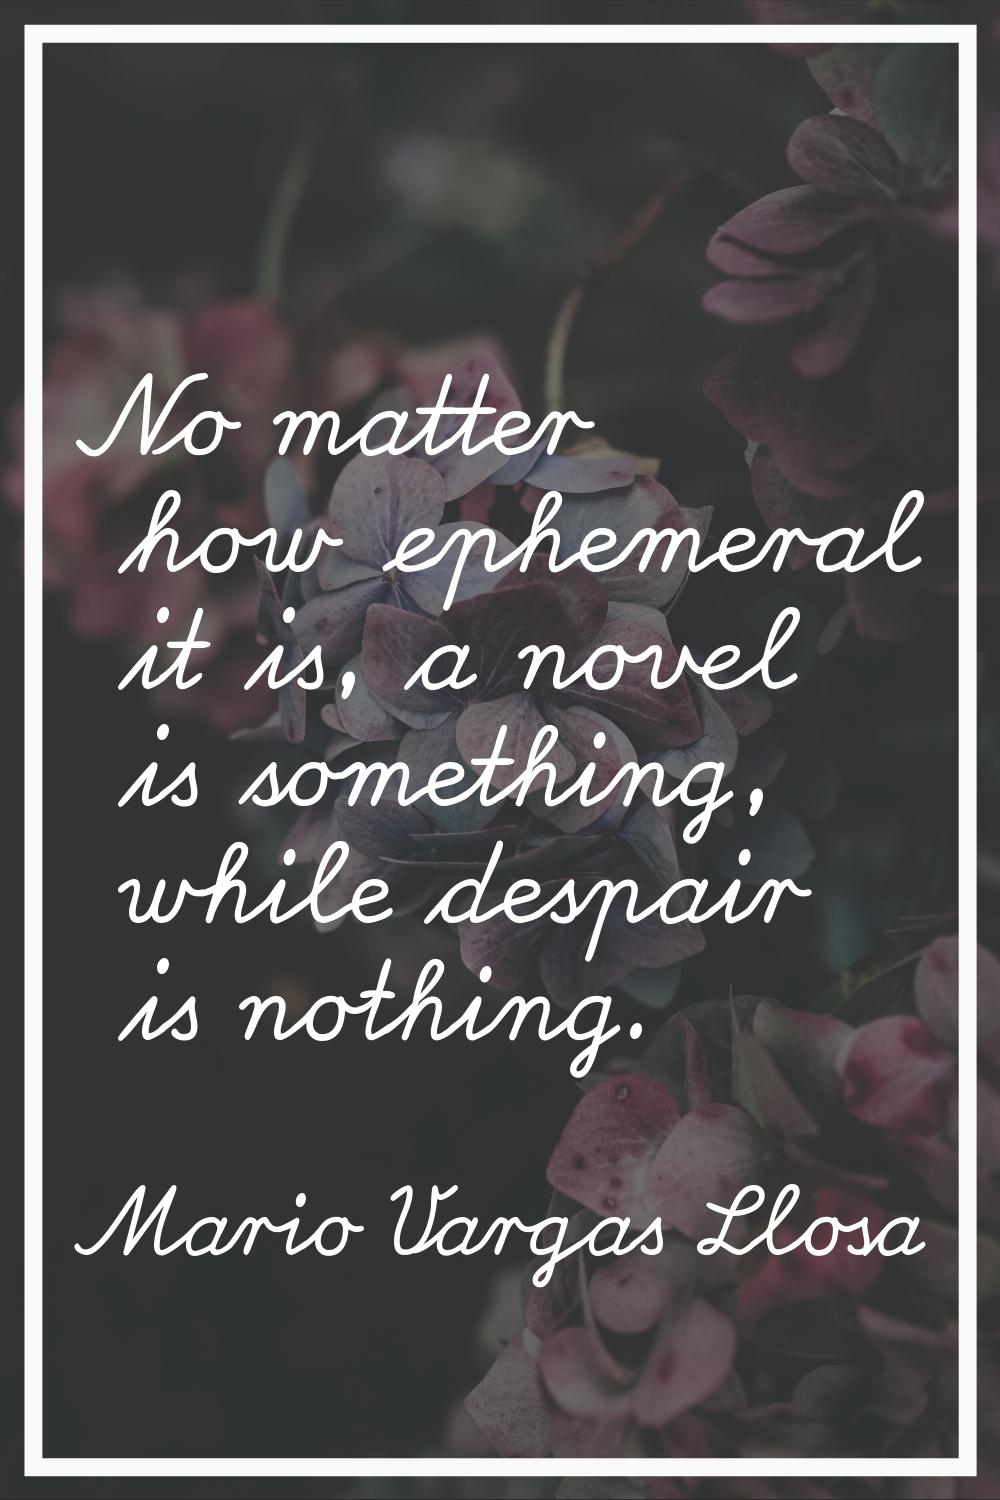 No matter how ephemeral it is, a novel is something, while despair is nothing.